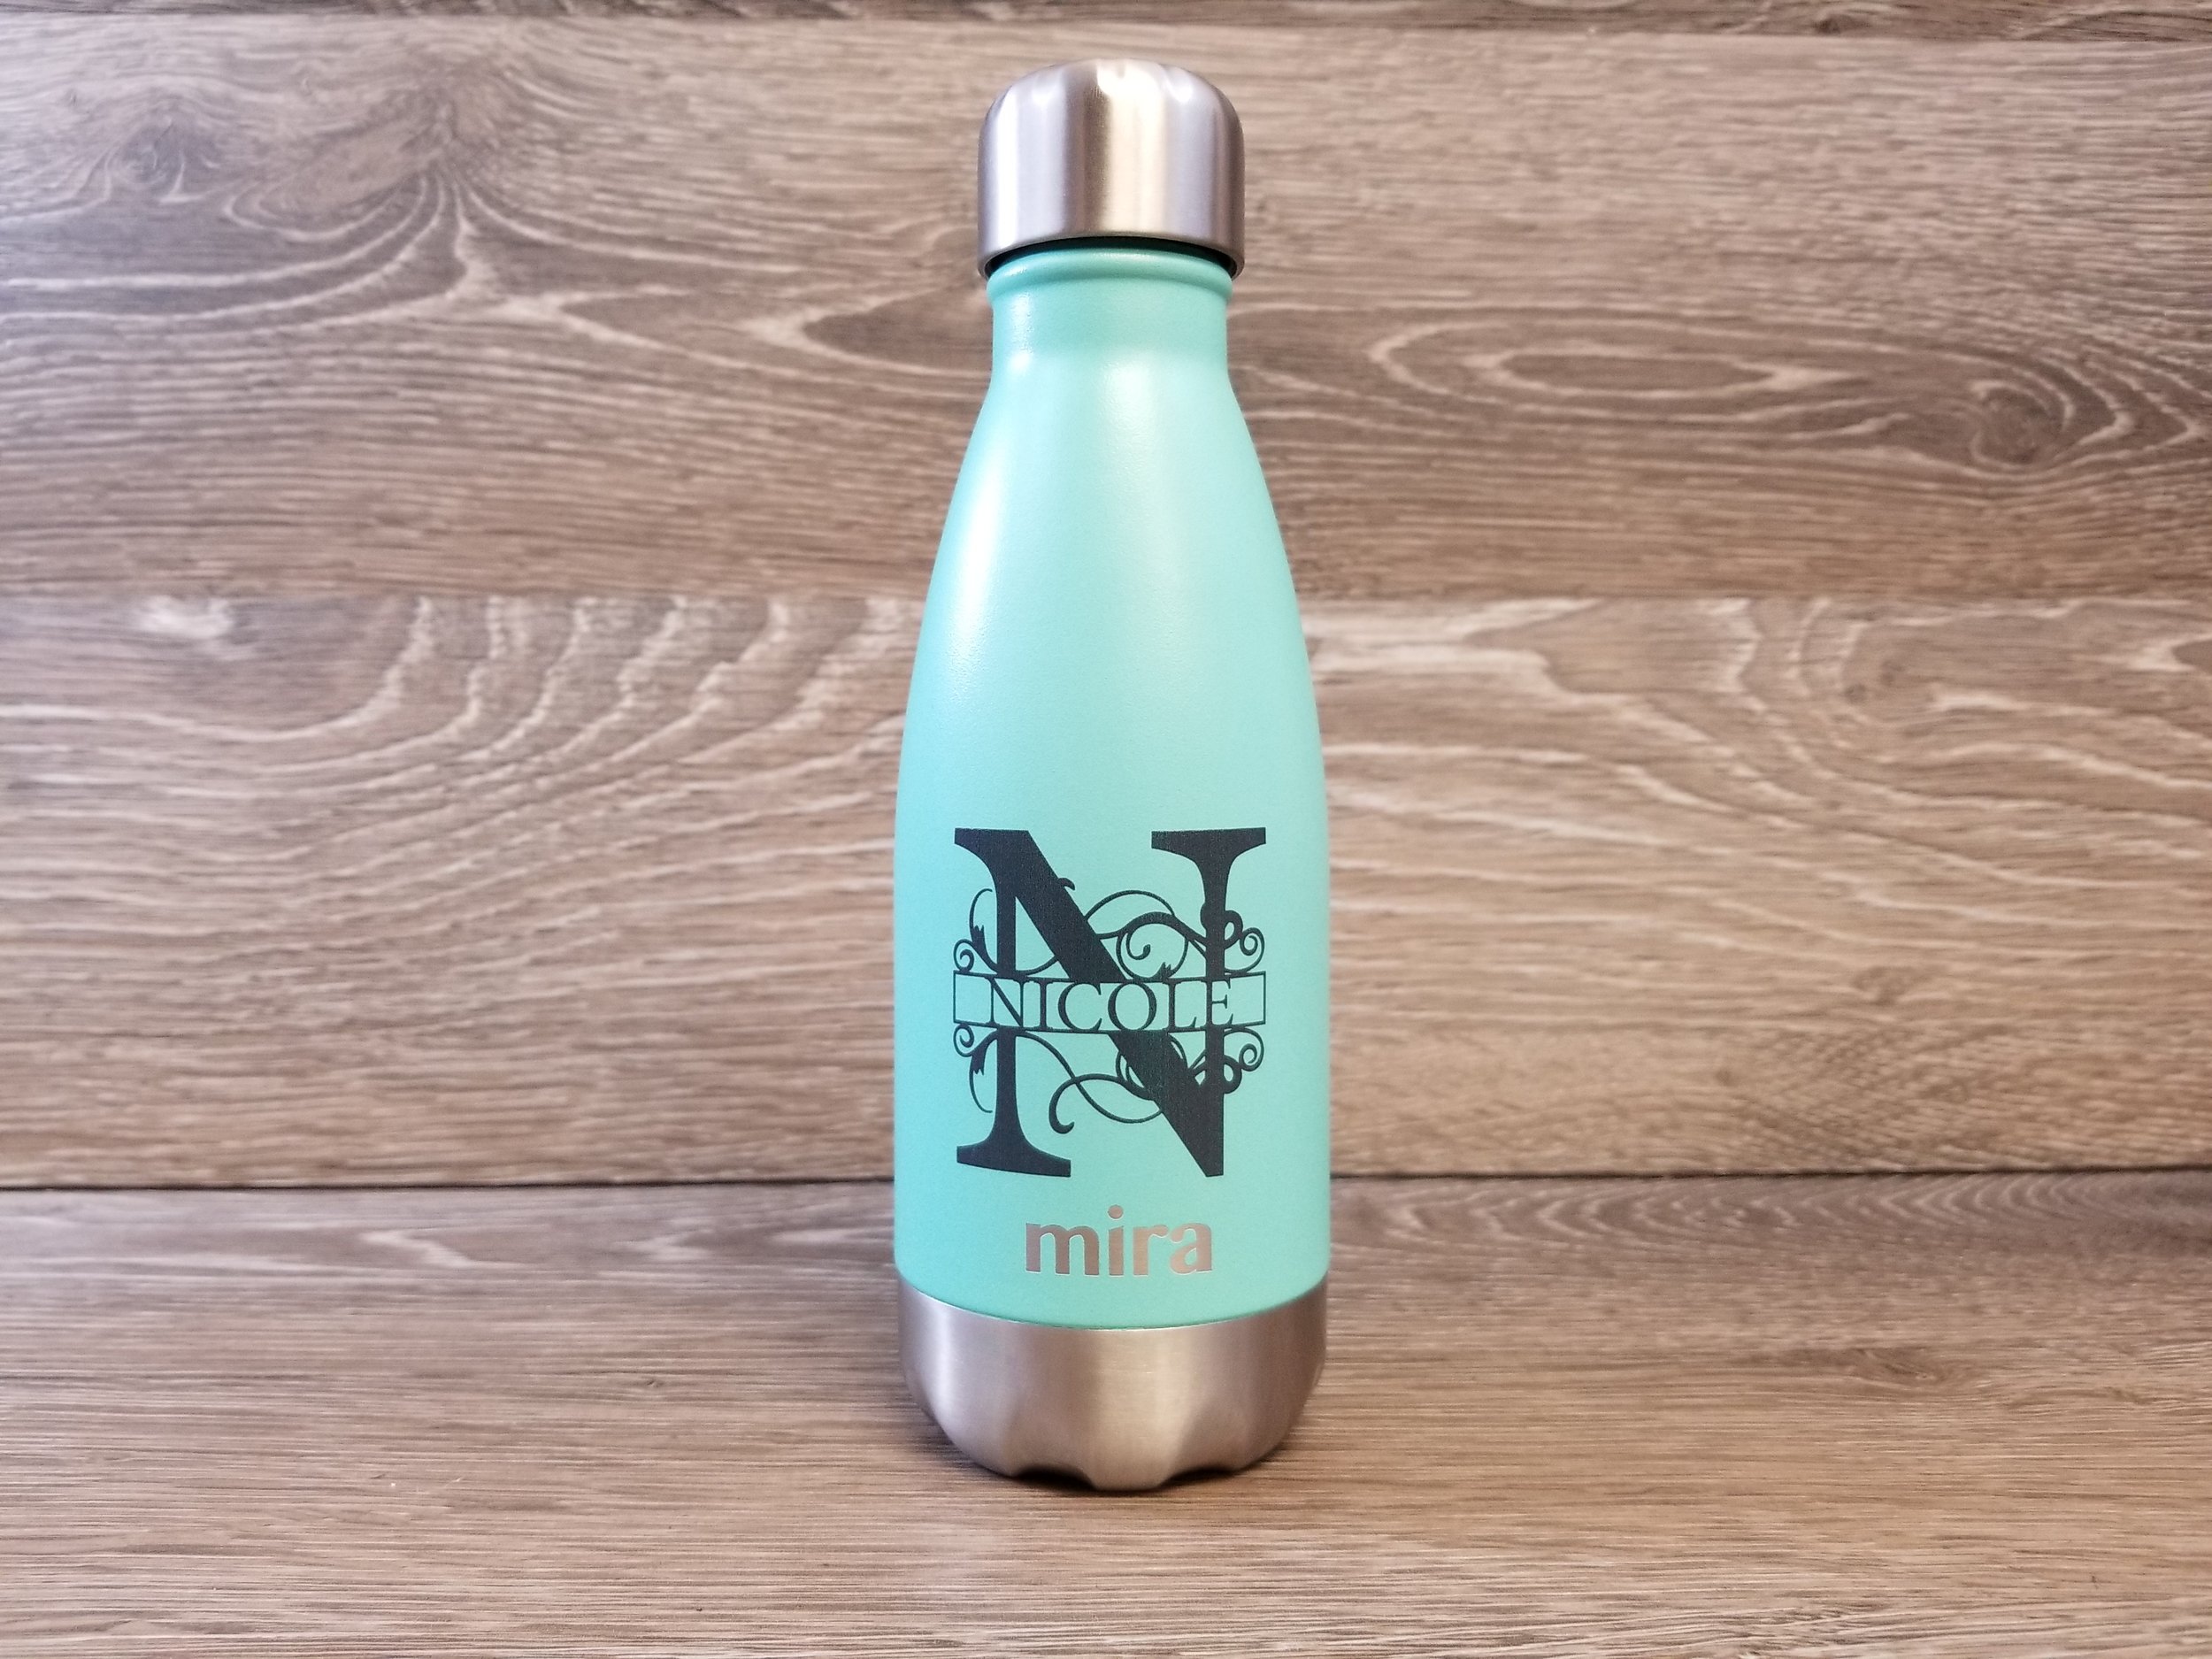 Personalized Water Bottle - Print on Water Bottle - Stainless Steel Water Bottle -Metal Water Bottle - Personalized Metal Water Bottle